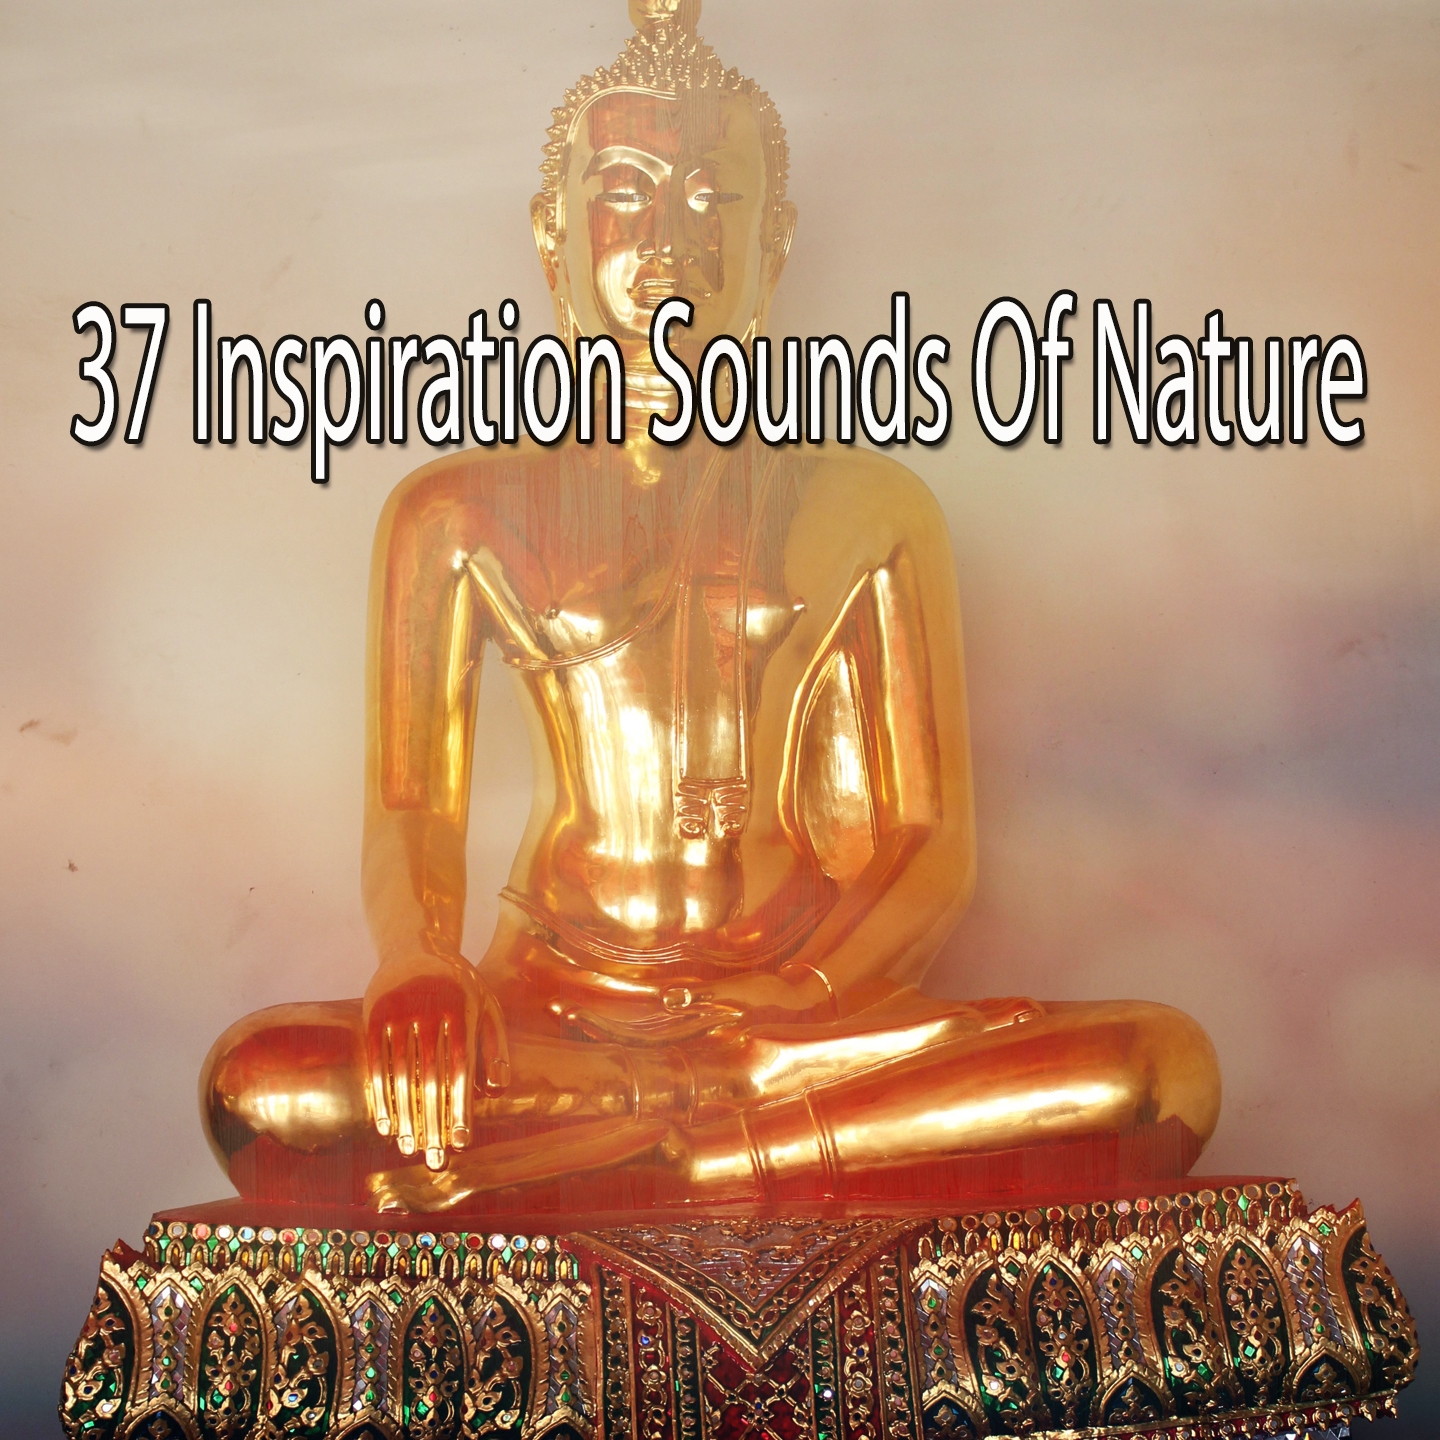 37 Inspiration Sounds Of Nature